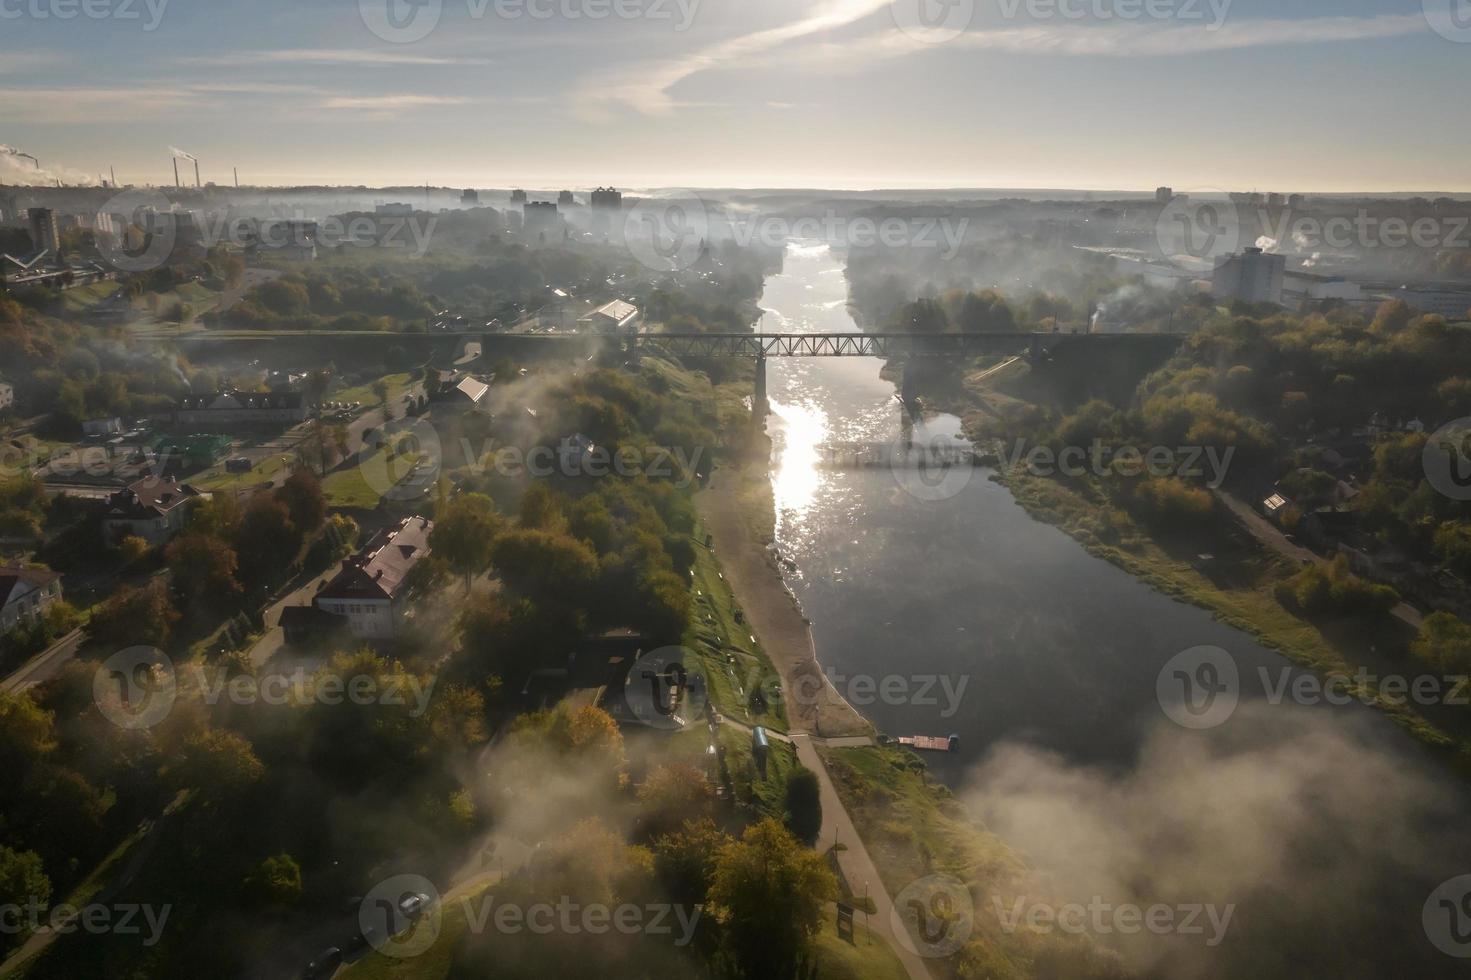 earlier foggy morning and aerial panoramic view on medieval castle and promenade overlooking the old city and historic buildings near wide river with bridge photo